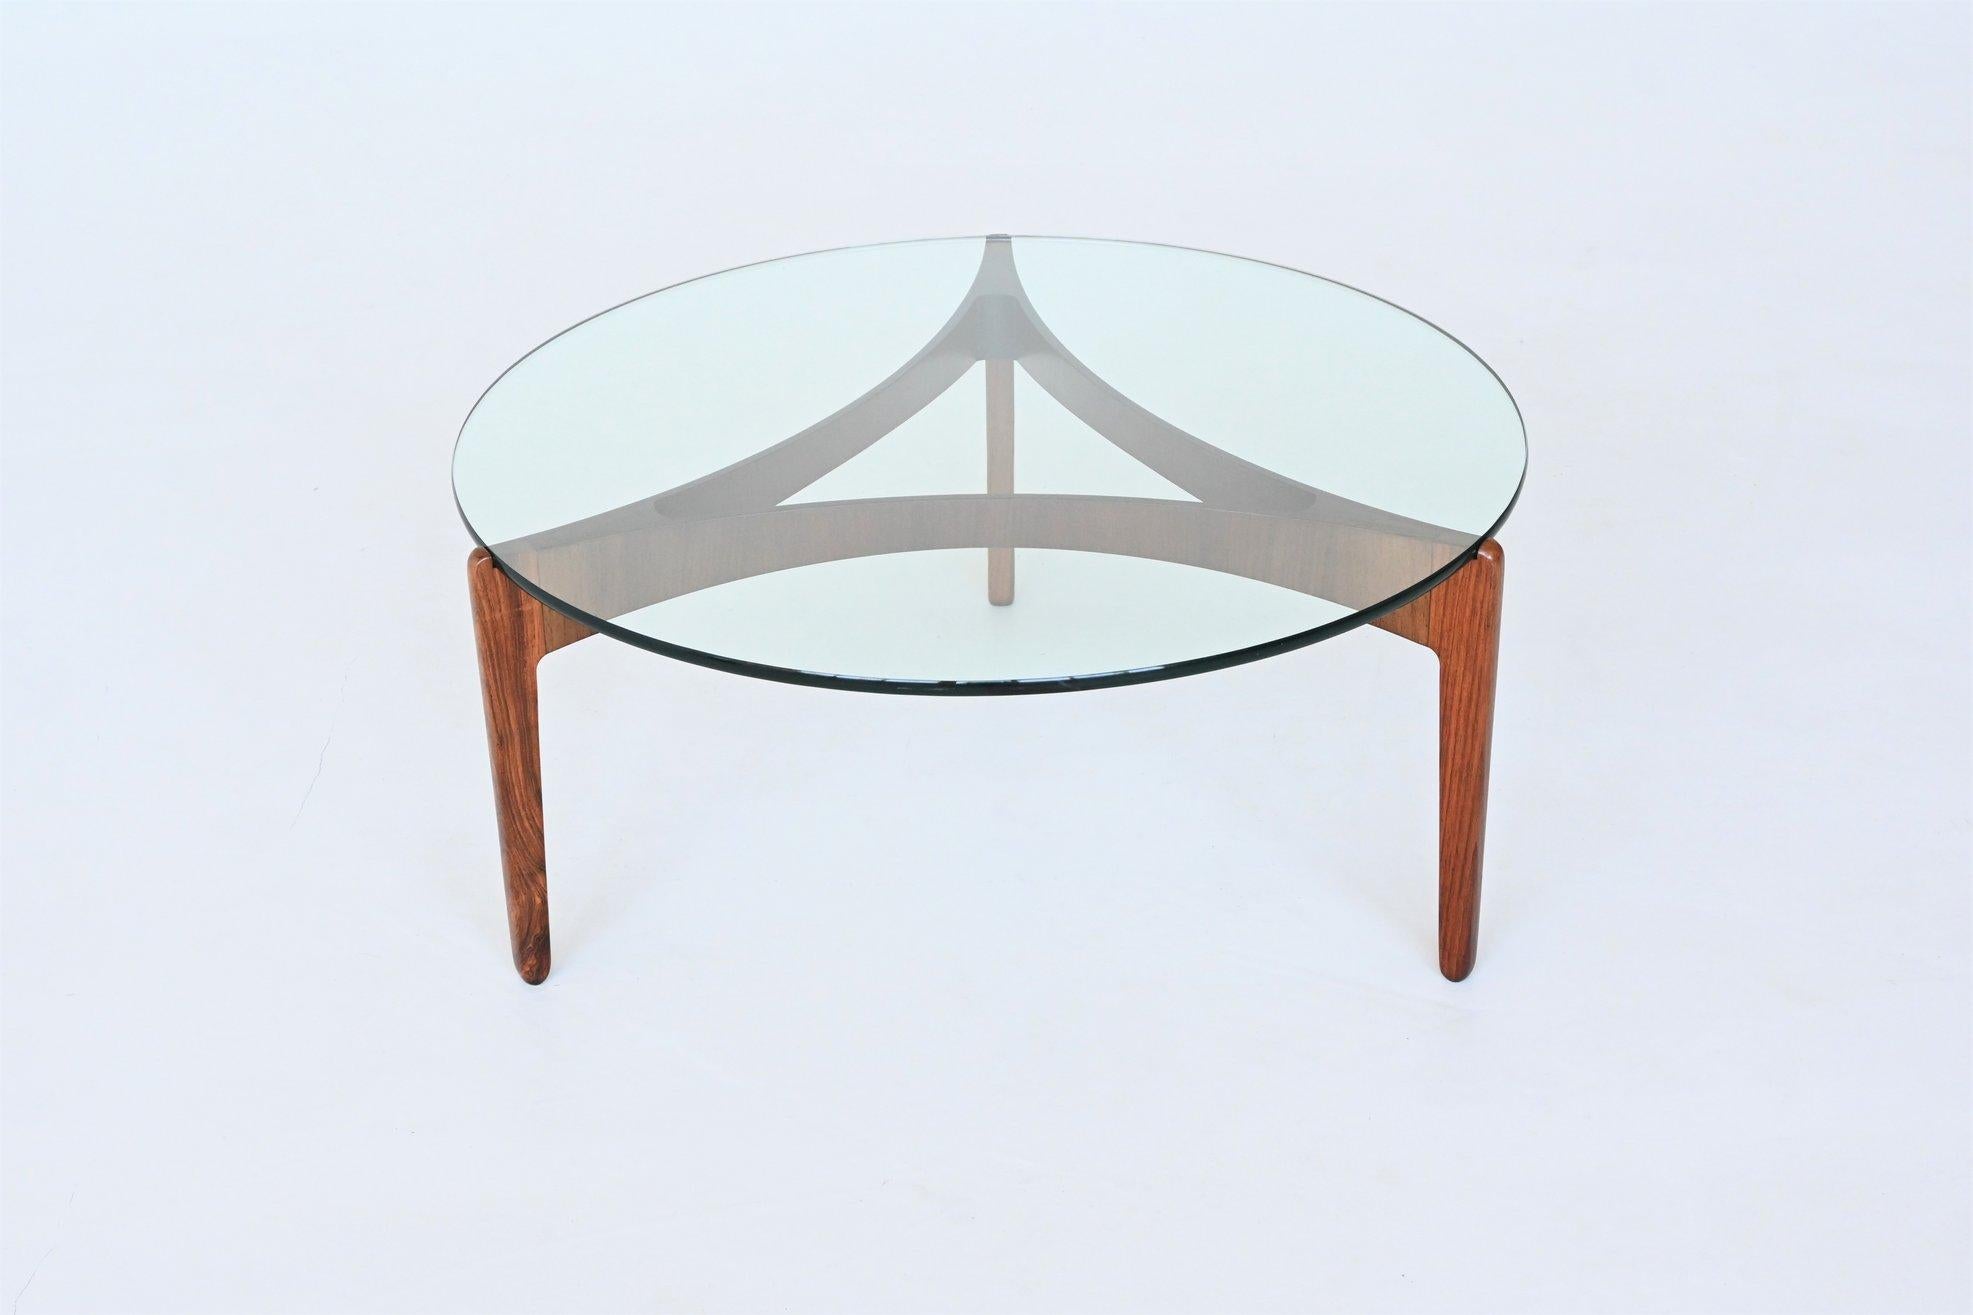 Stunning sculptural coffee table model 104 designed by Sven Ellekaer for Chirstian Linneberg, Denmark 1962. This exquisite coffee table is composed of a beautiful elegant bent rosewood base highly figured grain which supporting a thick transparent